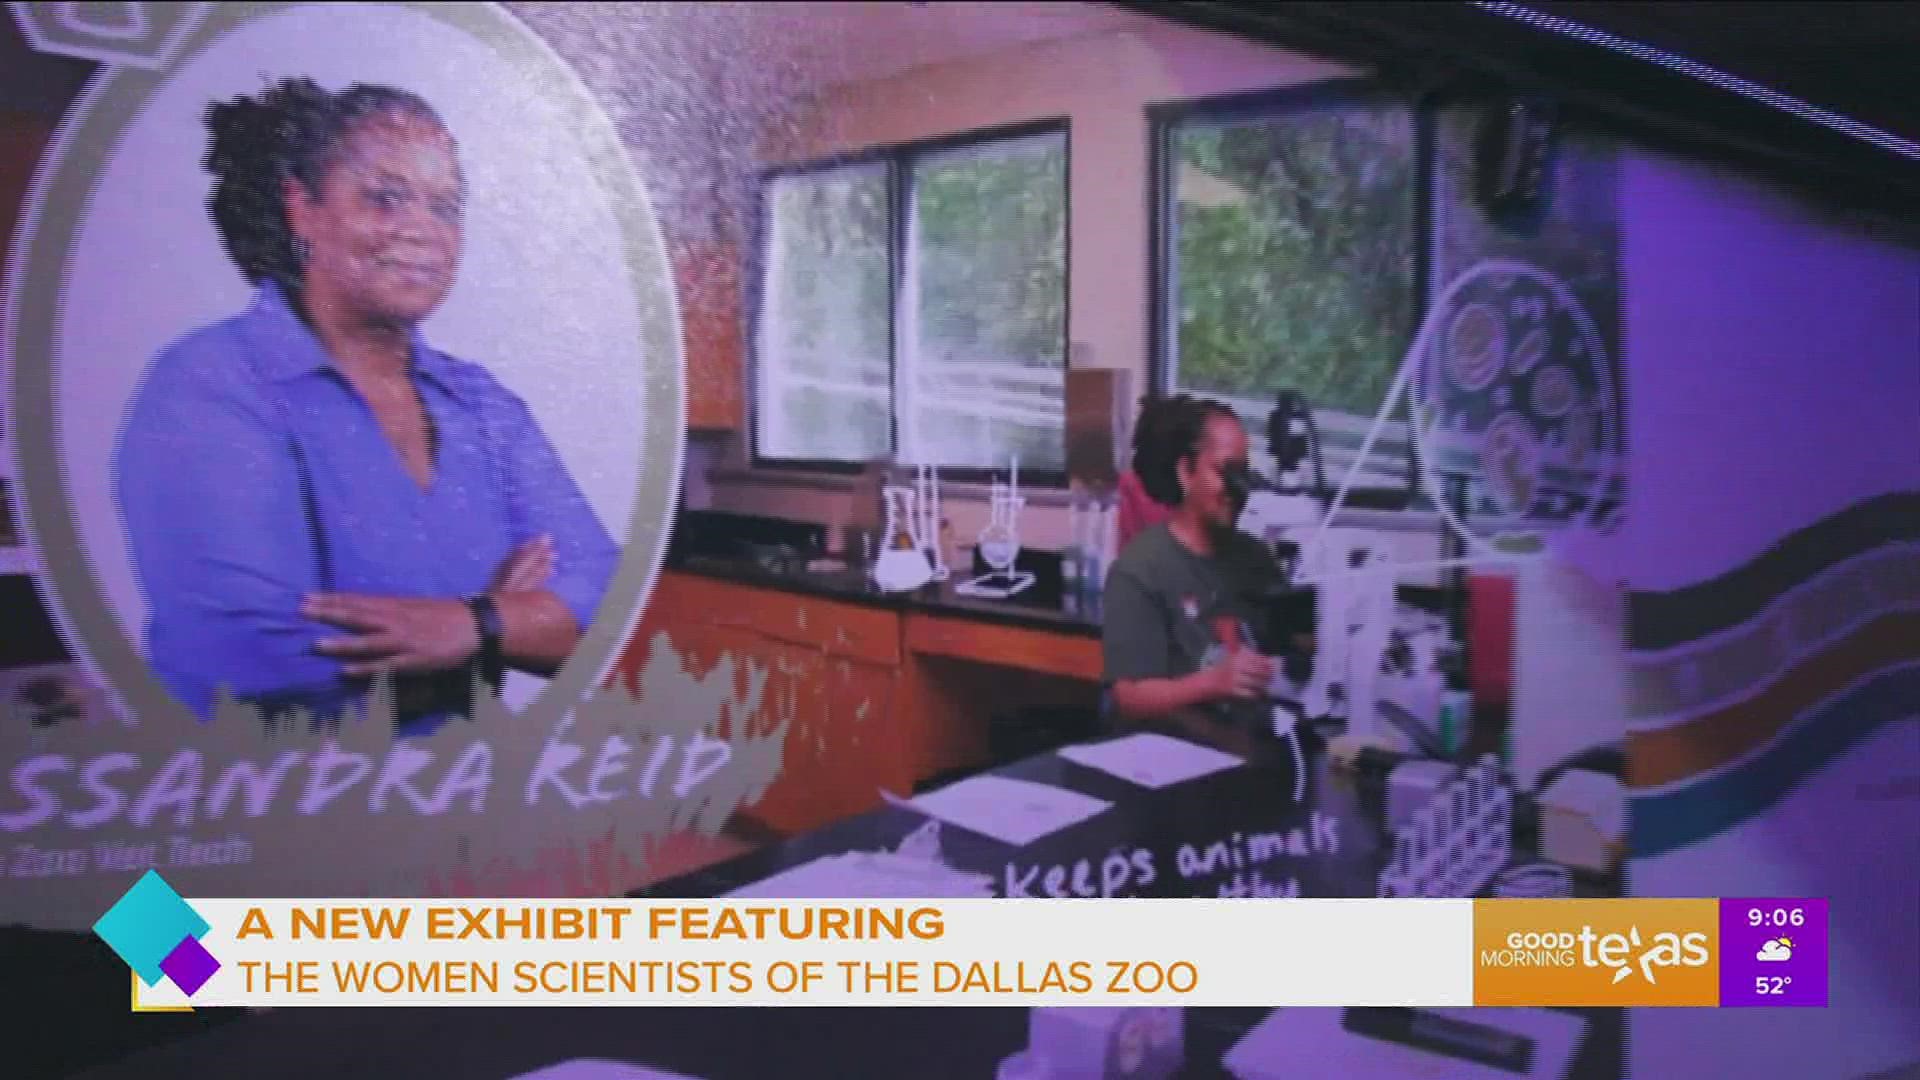 There’s a new exhibit featuring the amazing scientists of the Dallas Zoo…   and they’re all women!